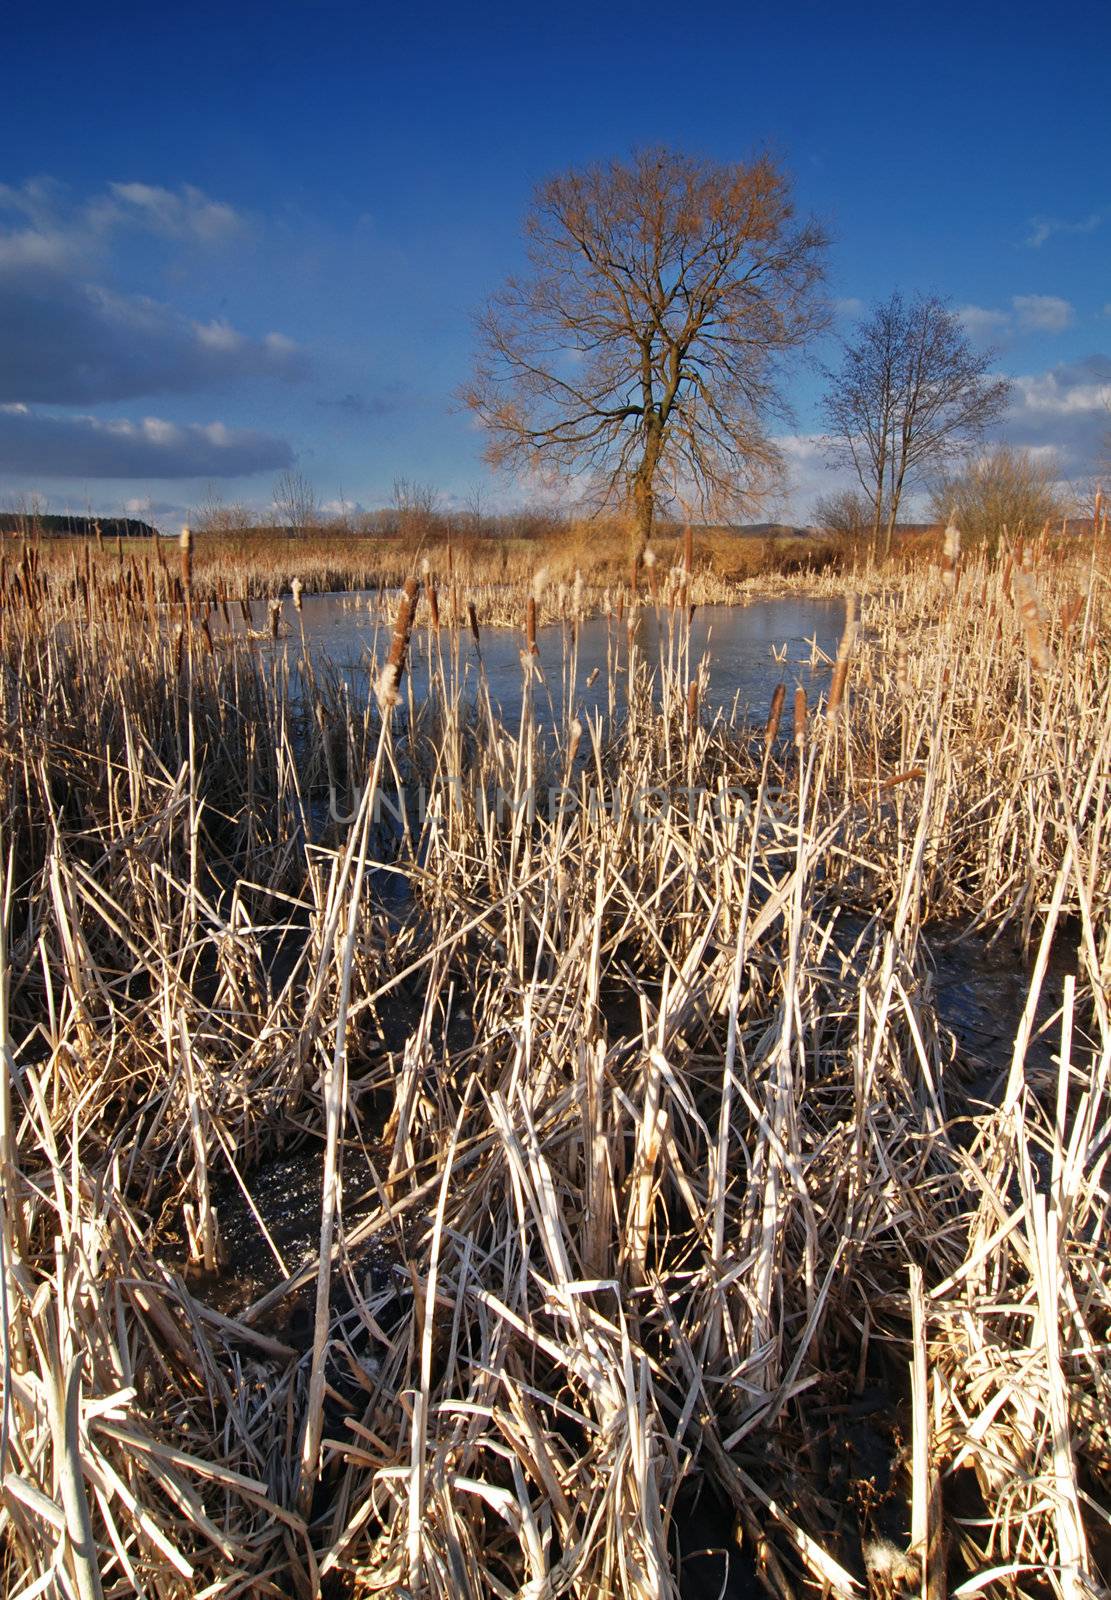 Romantic landscape of frozen lake with bulrush, tree in the back and a blue sky with clouds